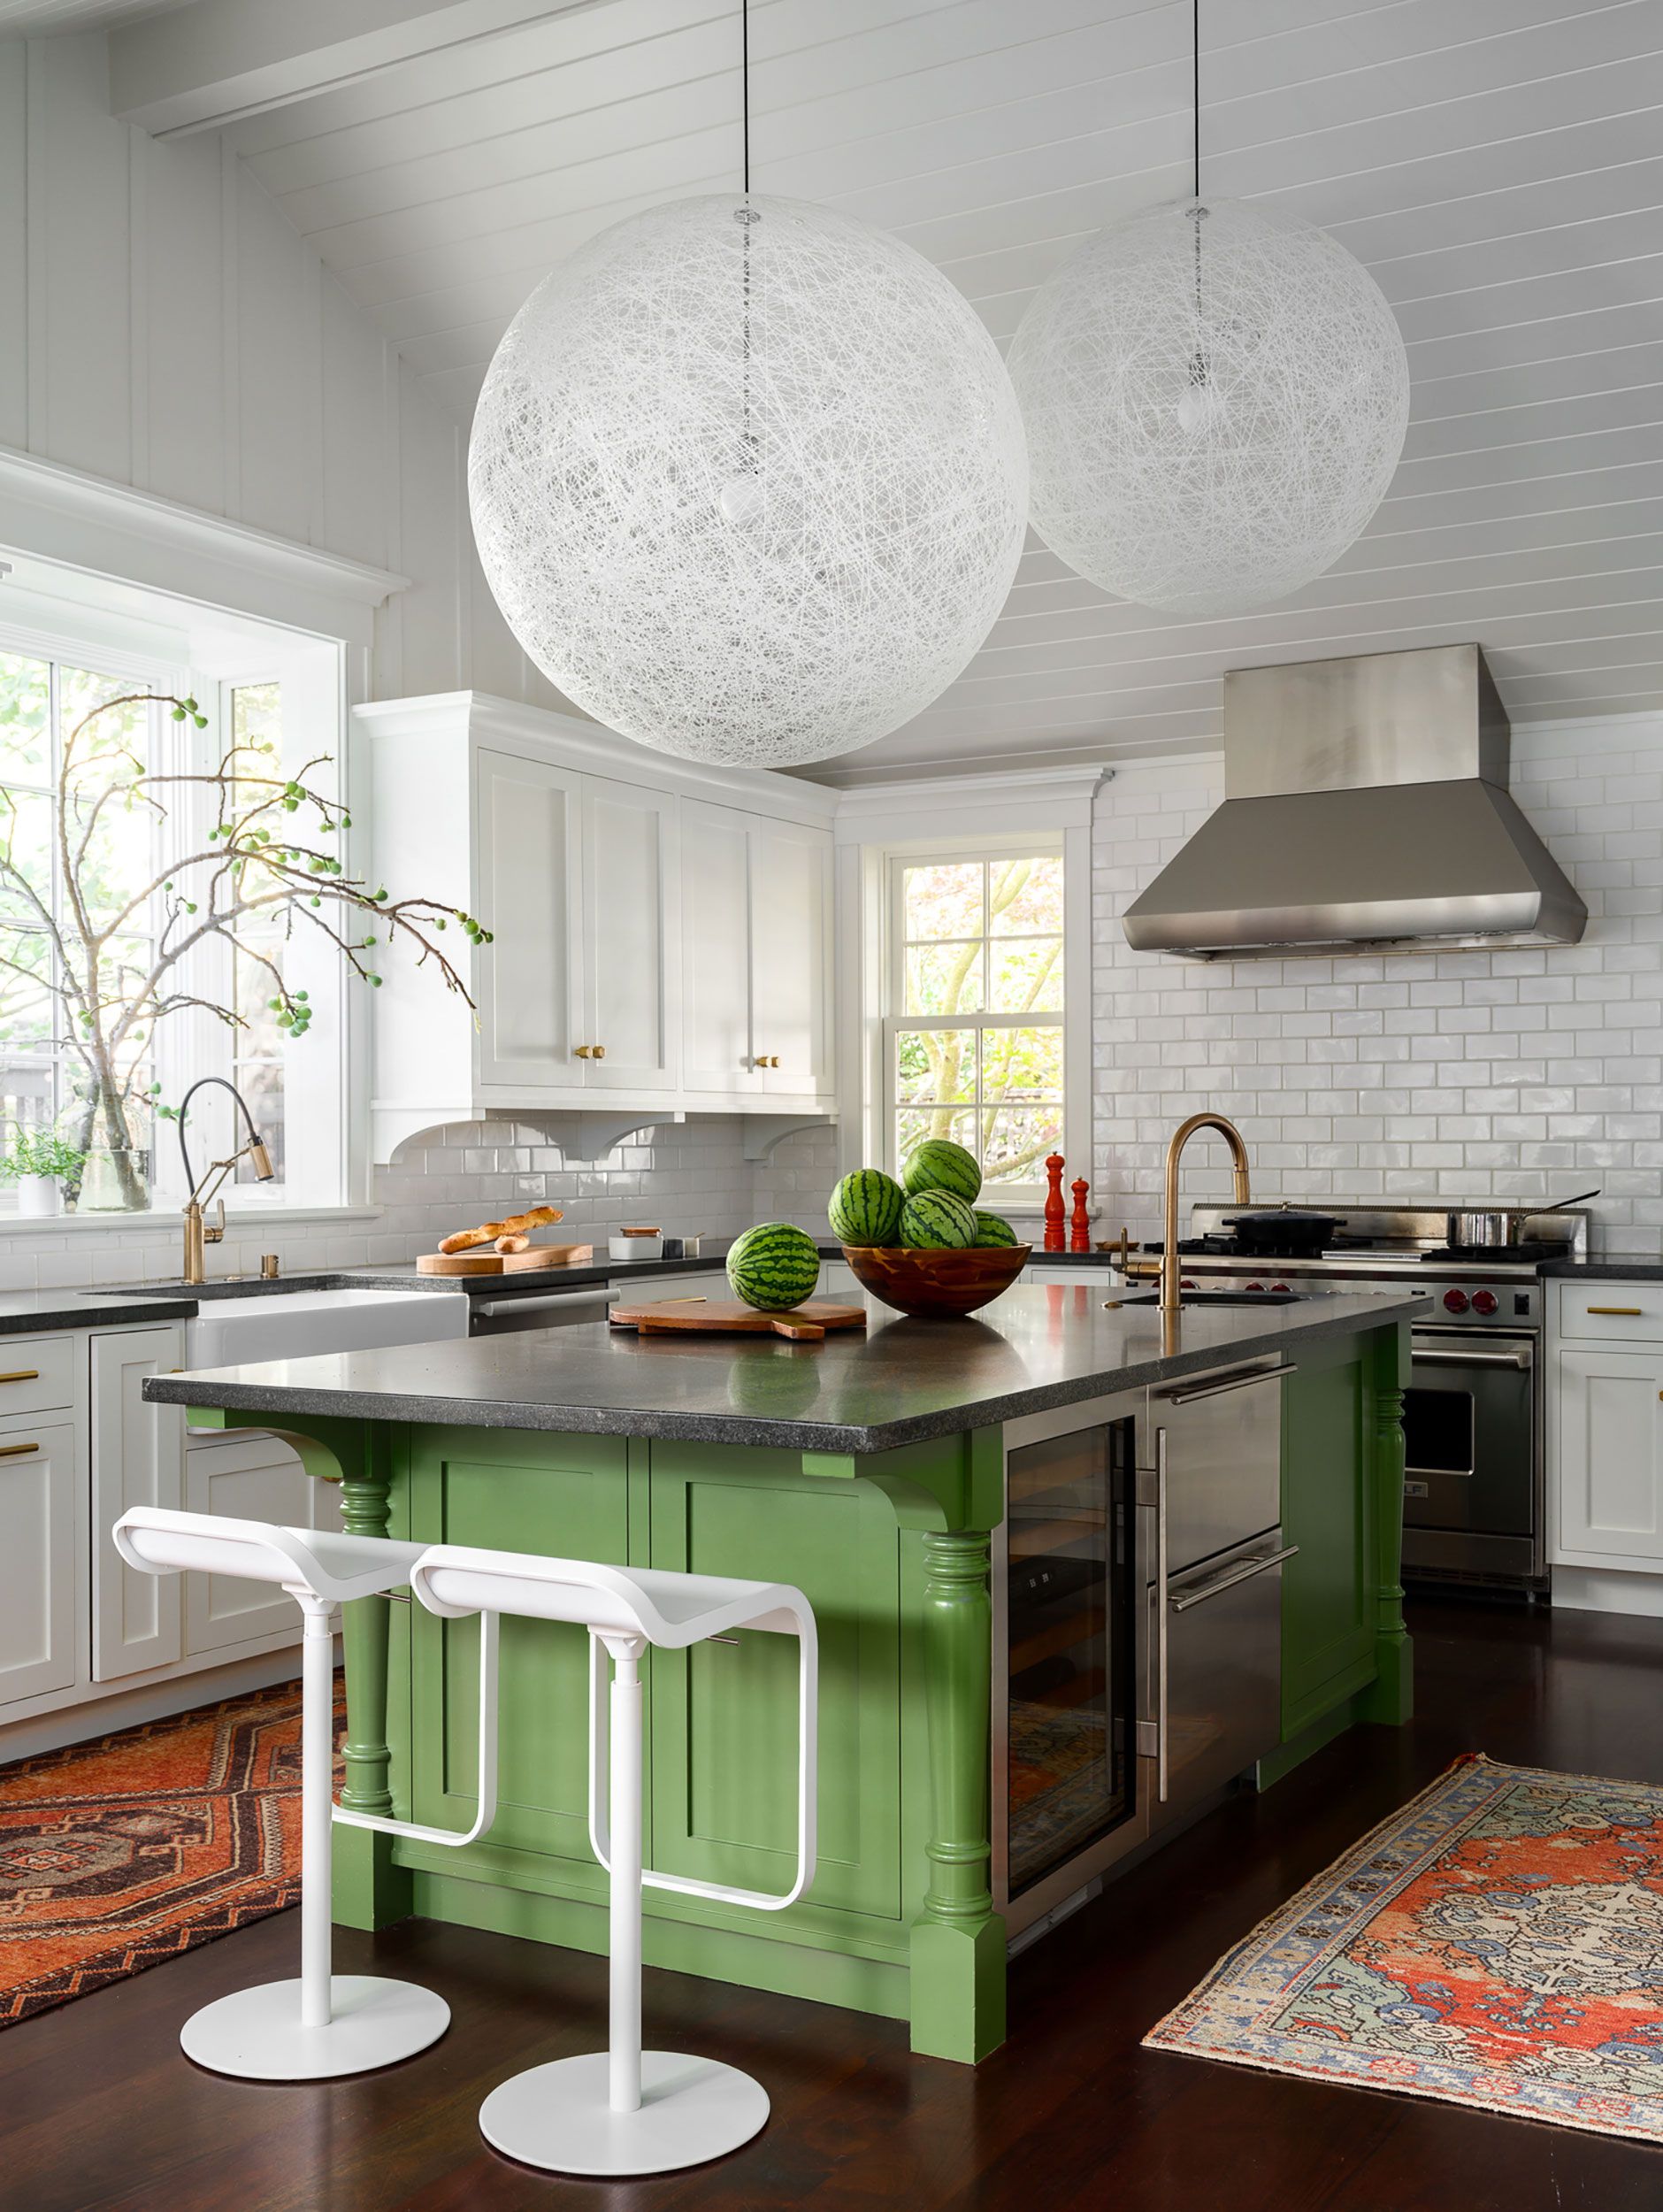 11 Things to Put on Your Kitchen Countertops